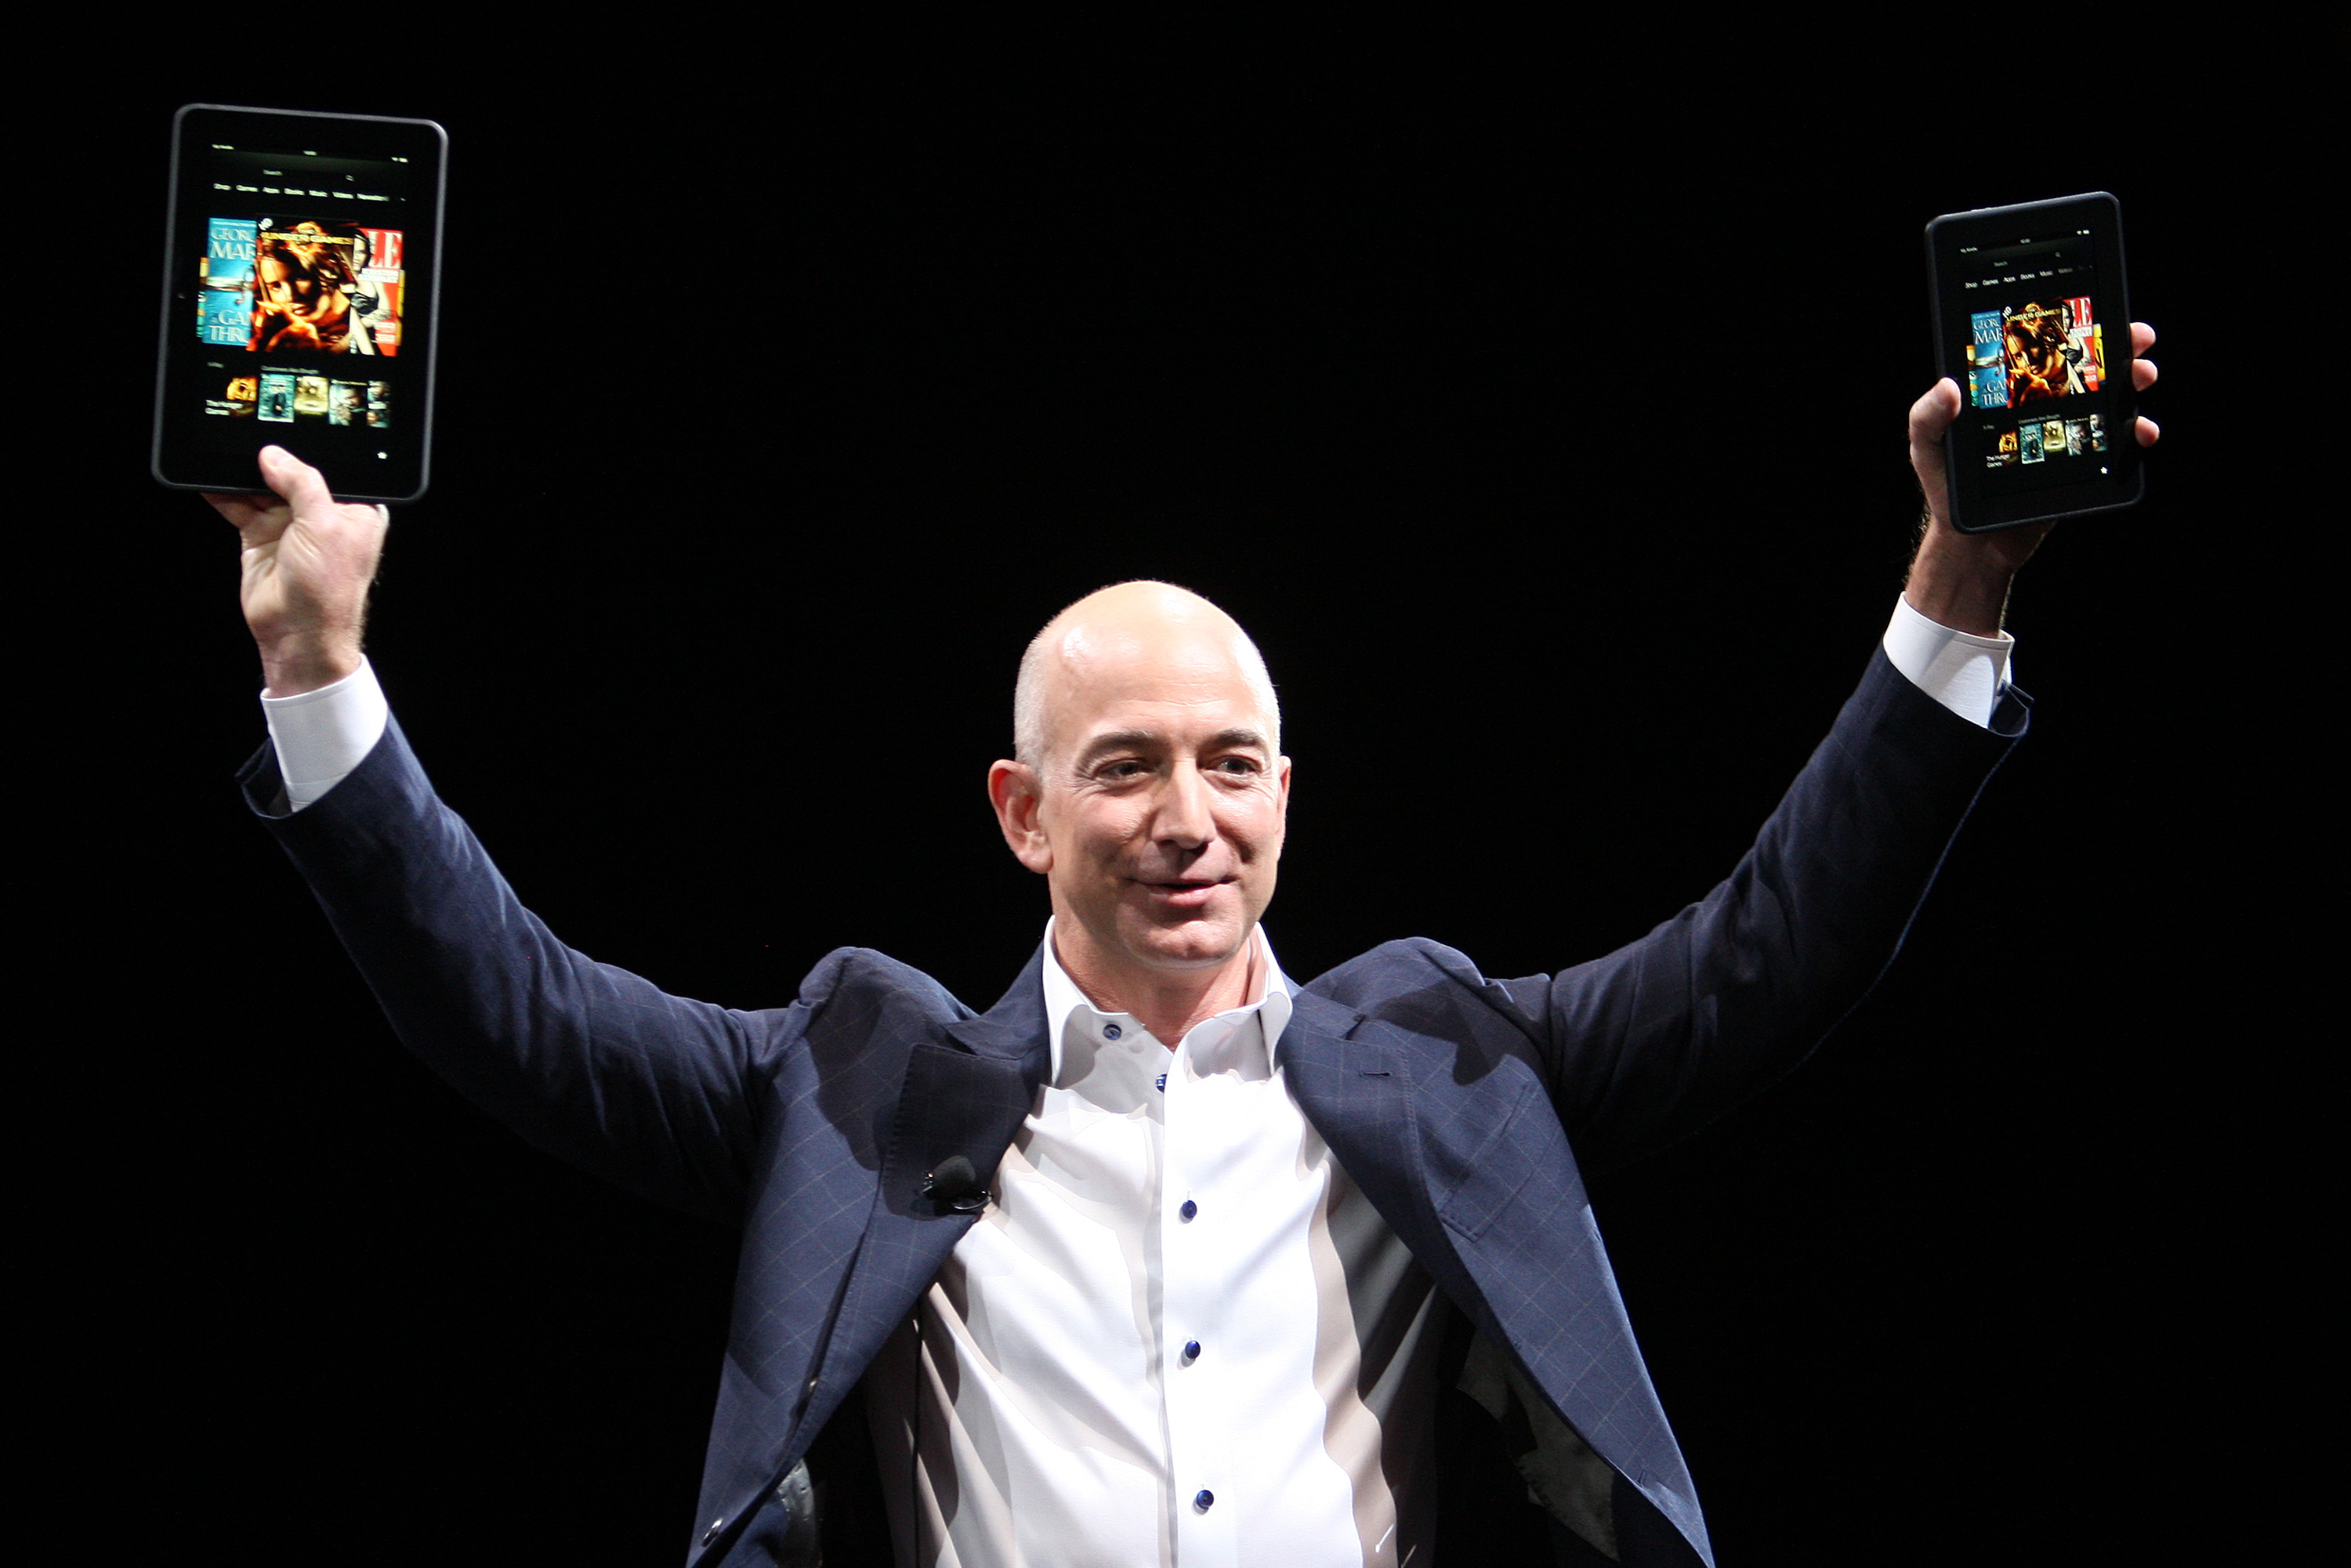 Amazon CEO Jeff Bezos holds up the new Kindle Fire HD reading device in two sizes during a press conference on September 6, 2012 in Santa Monica, California. (David McNew&mdash;Getty Images)